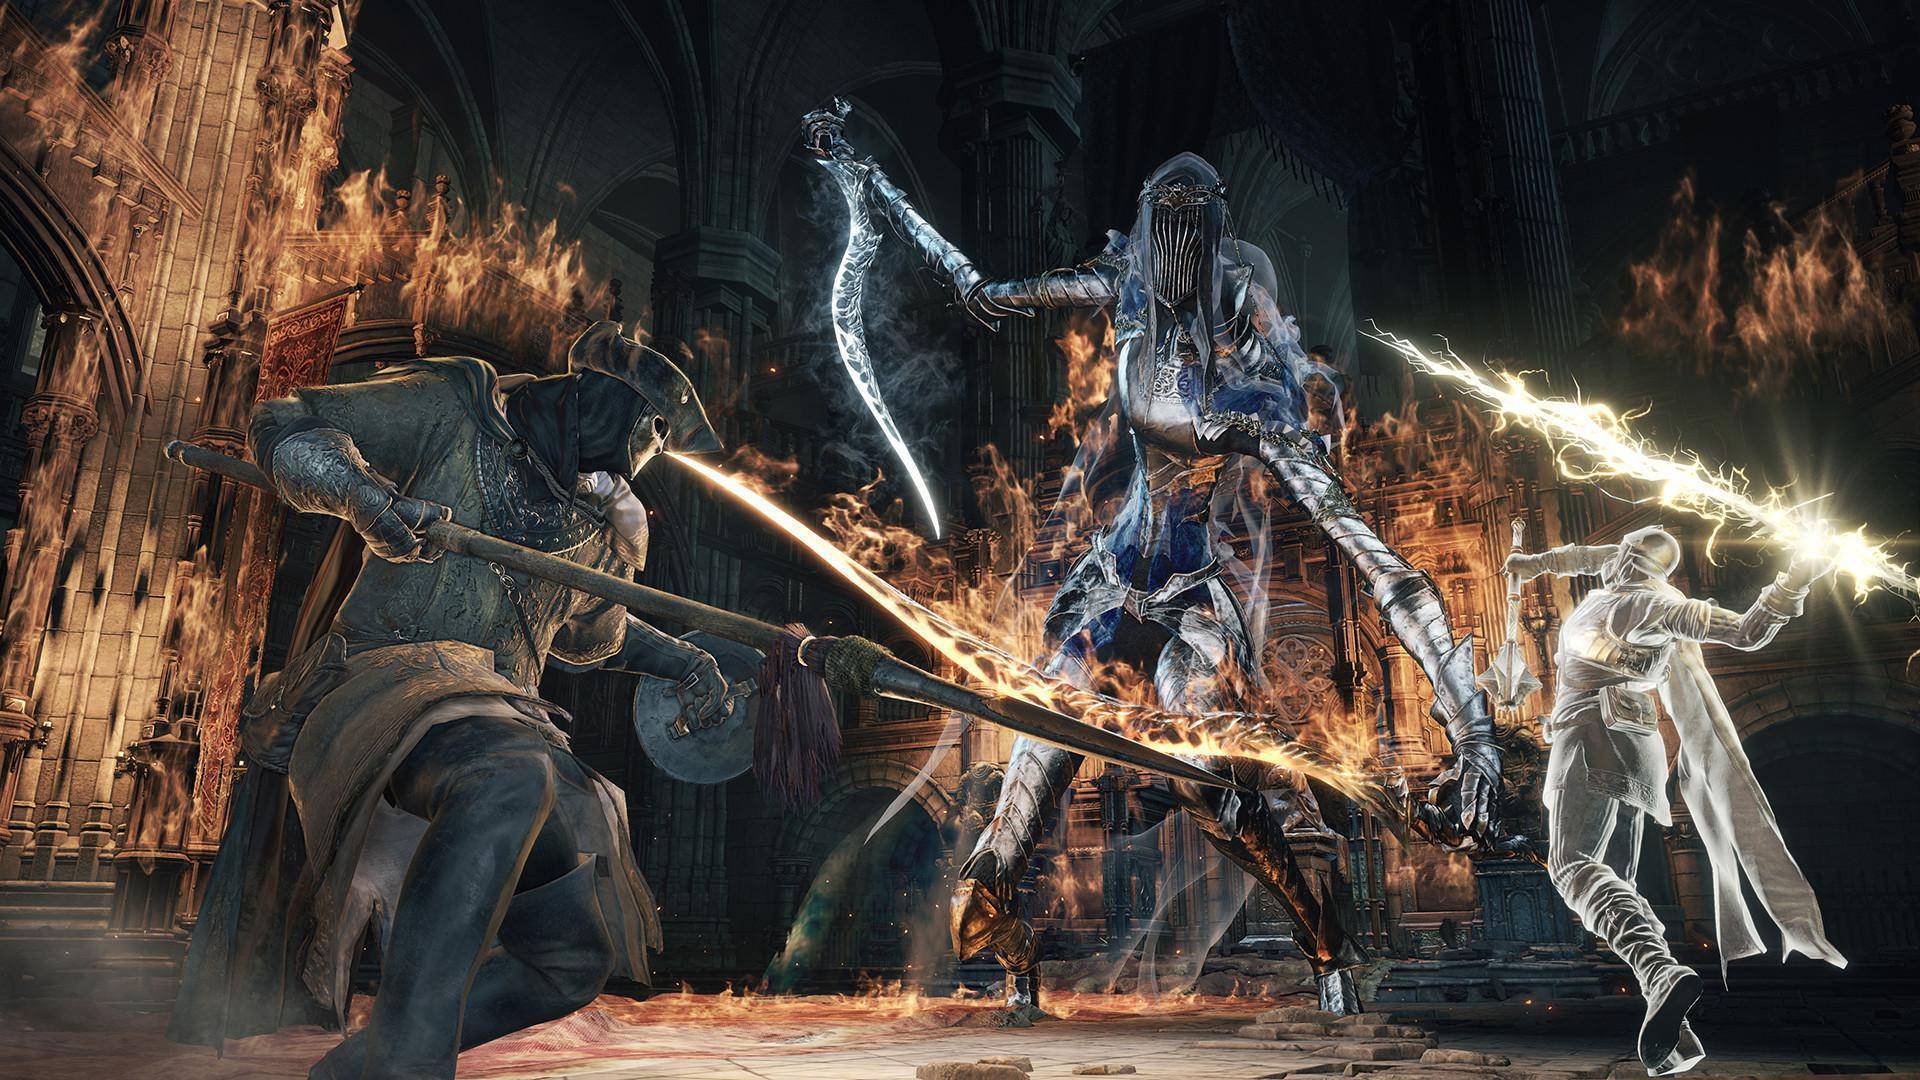 Dark Souls III 3 Deluxe Edition Activation key + Crack Latest Version PC Game For Free Download